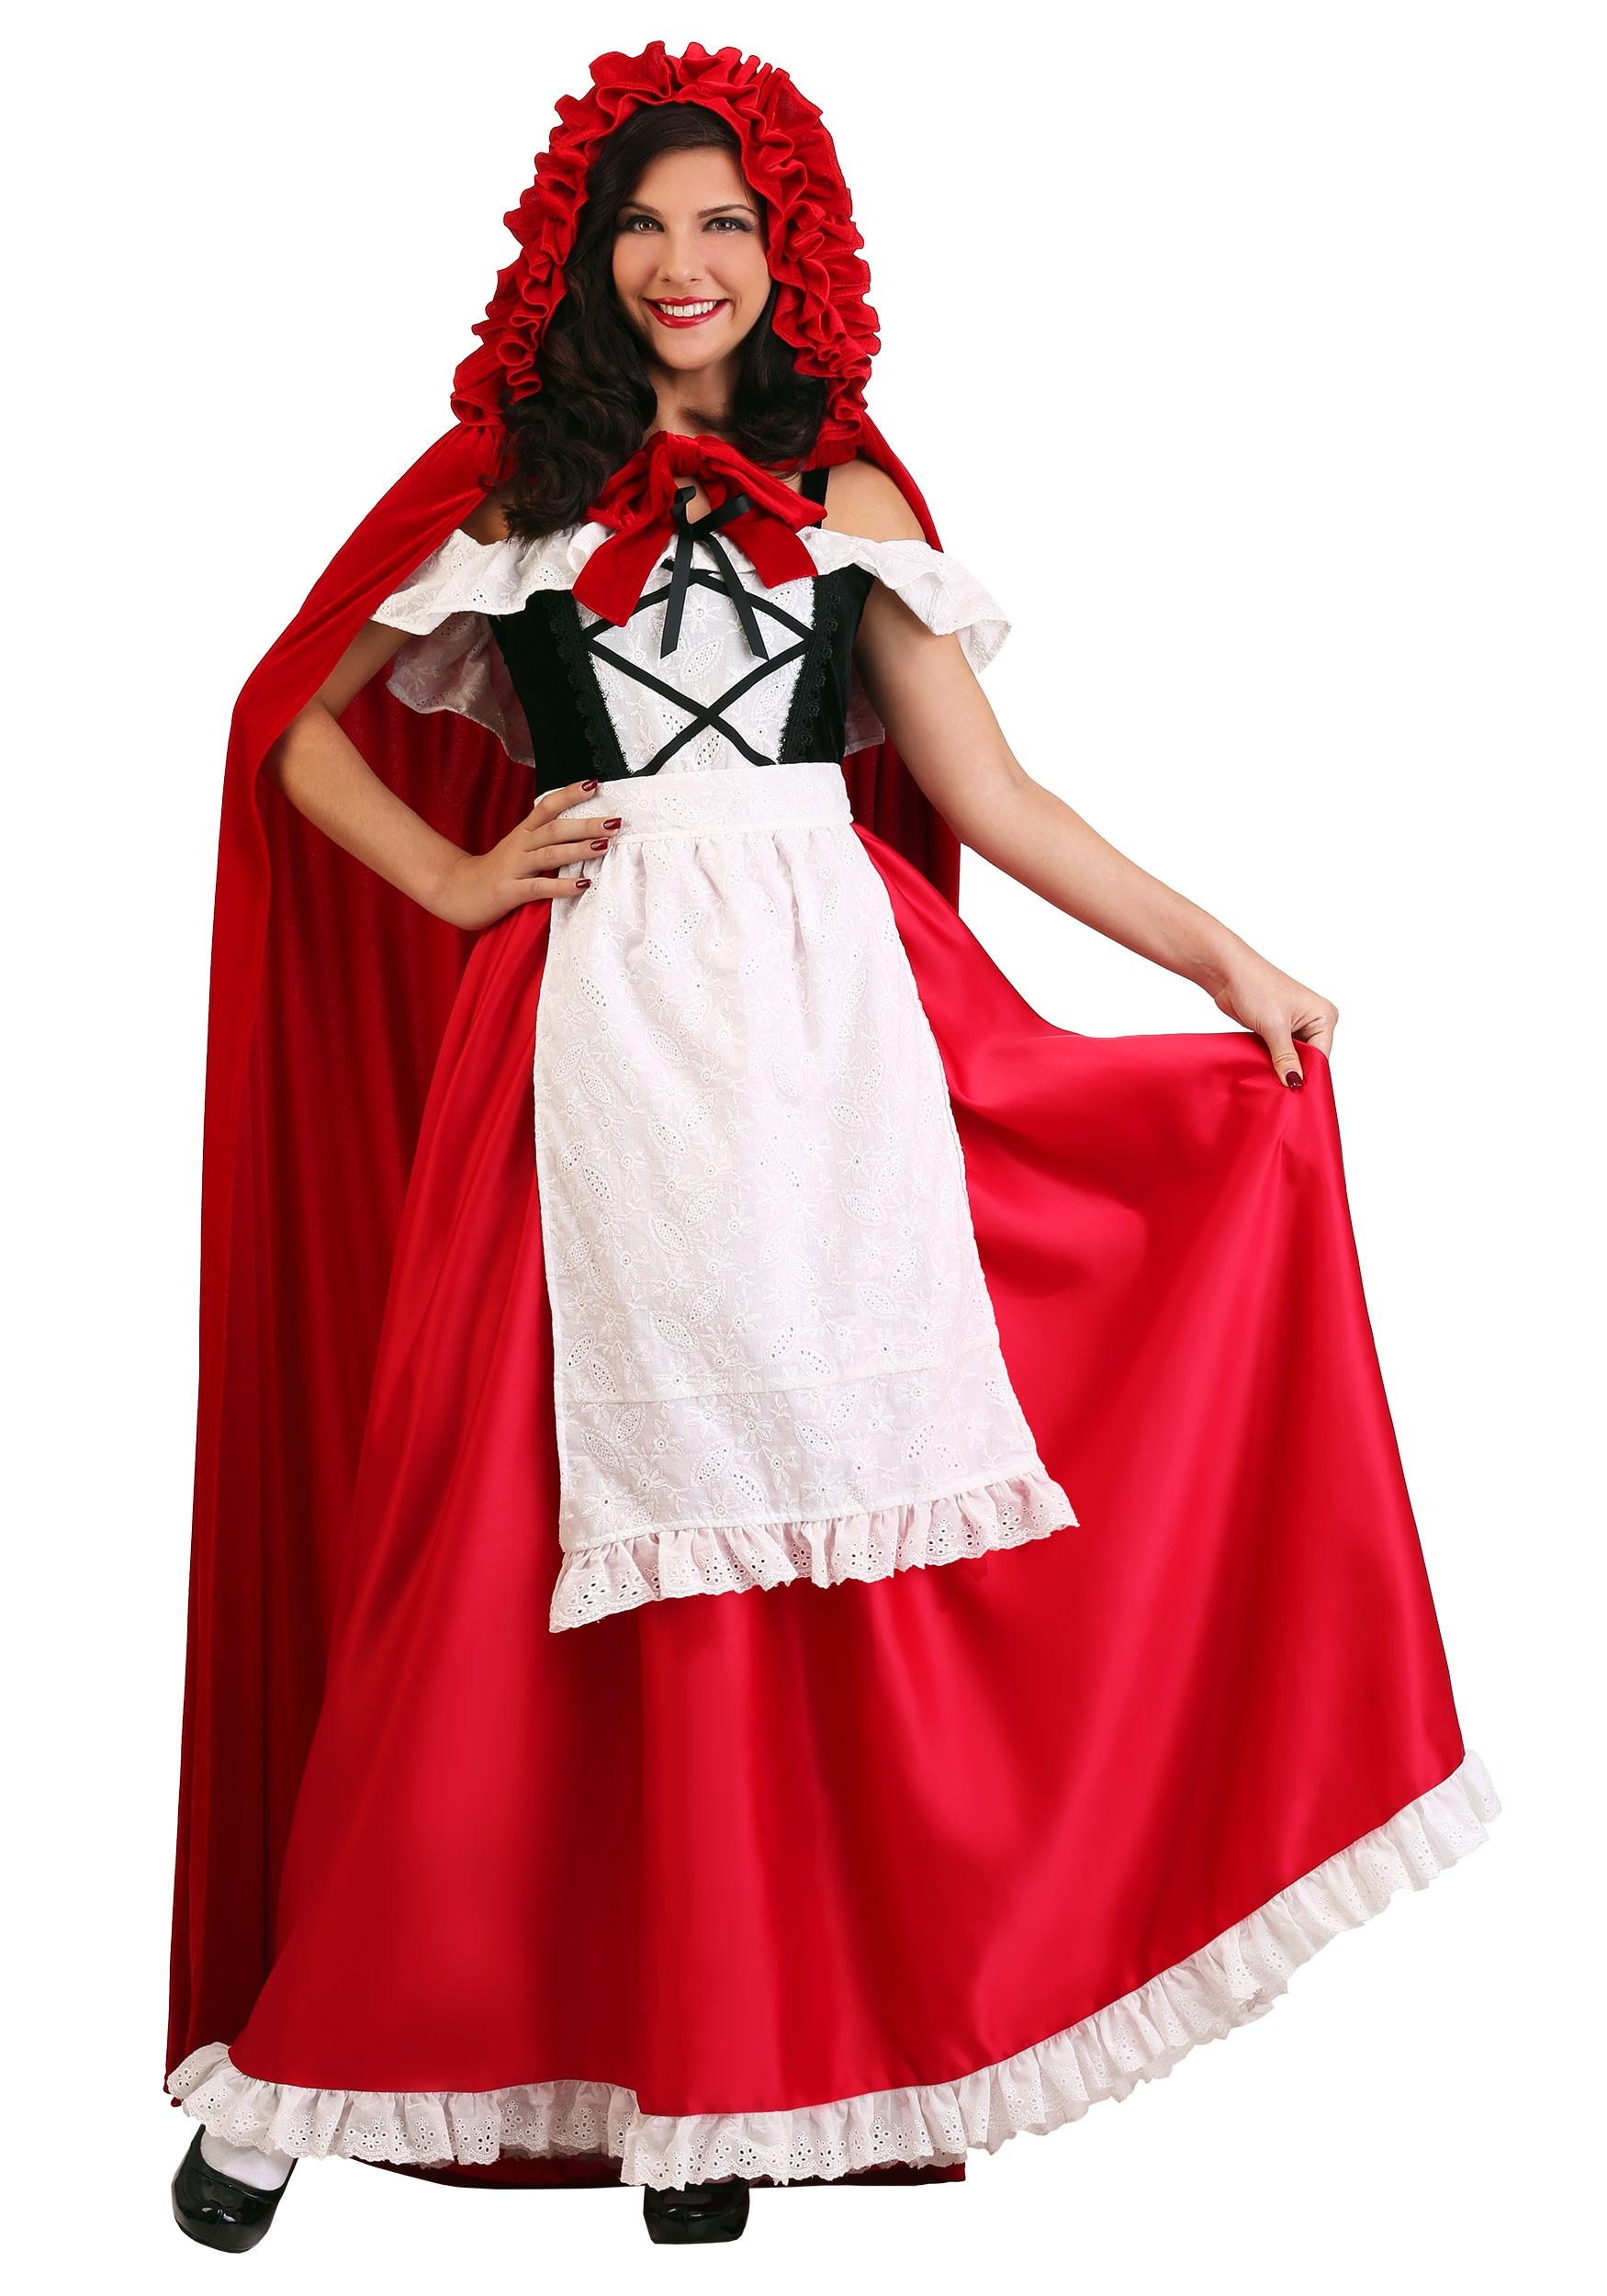 Photos - Fancy Dress Deluxe FUN Costumes  Red Riding Hood Women's Costume Black/Red/Whit 